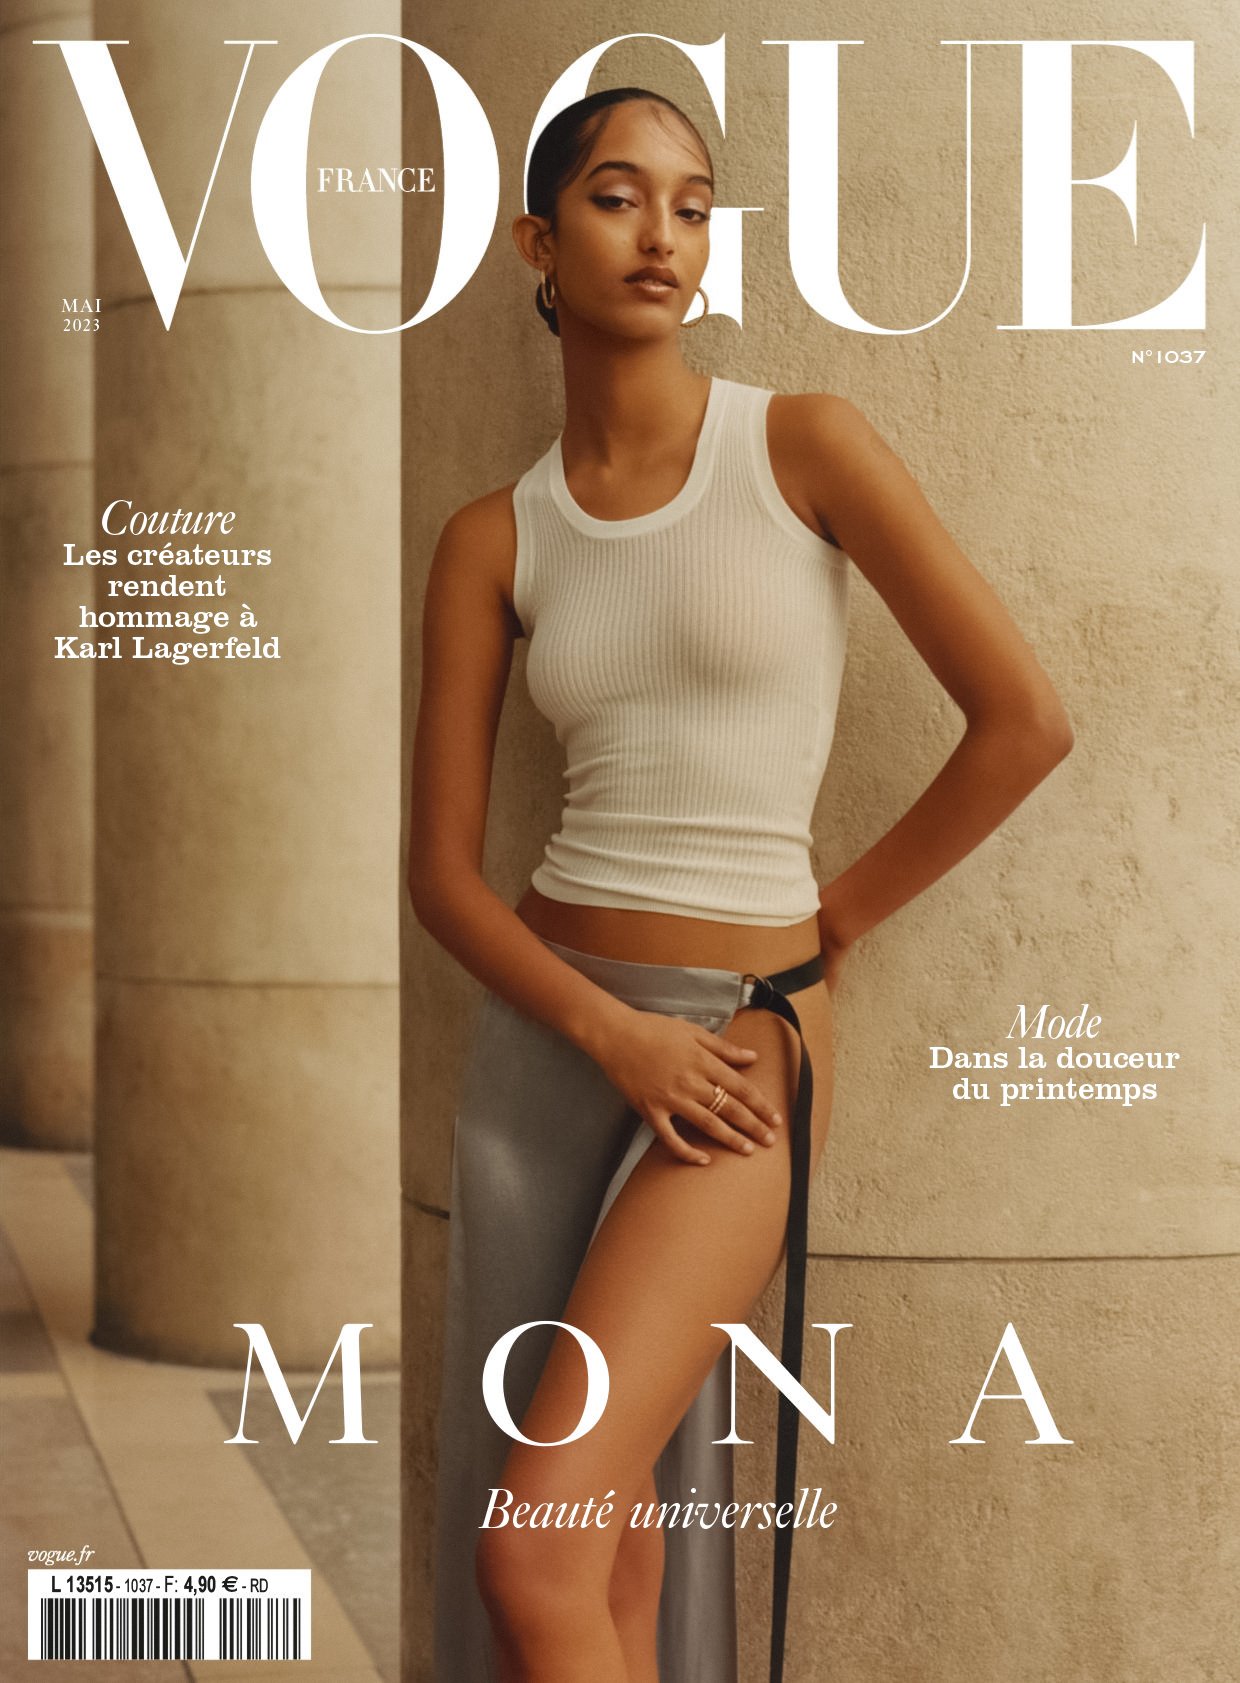 Mona-Tougaard-by-Theo-de-Gueltzl-Vogue-France-May-2023-00006.jpeg